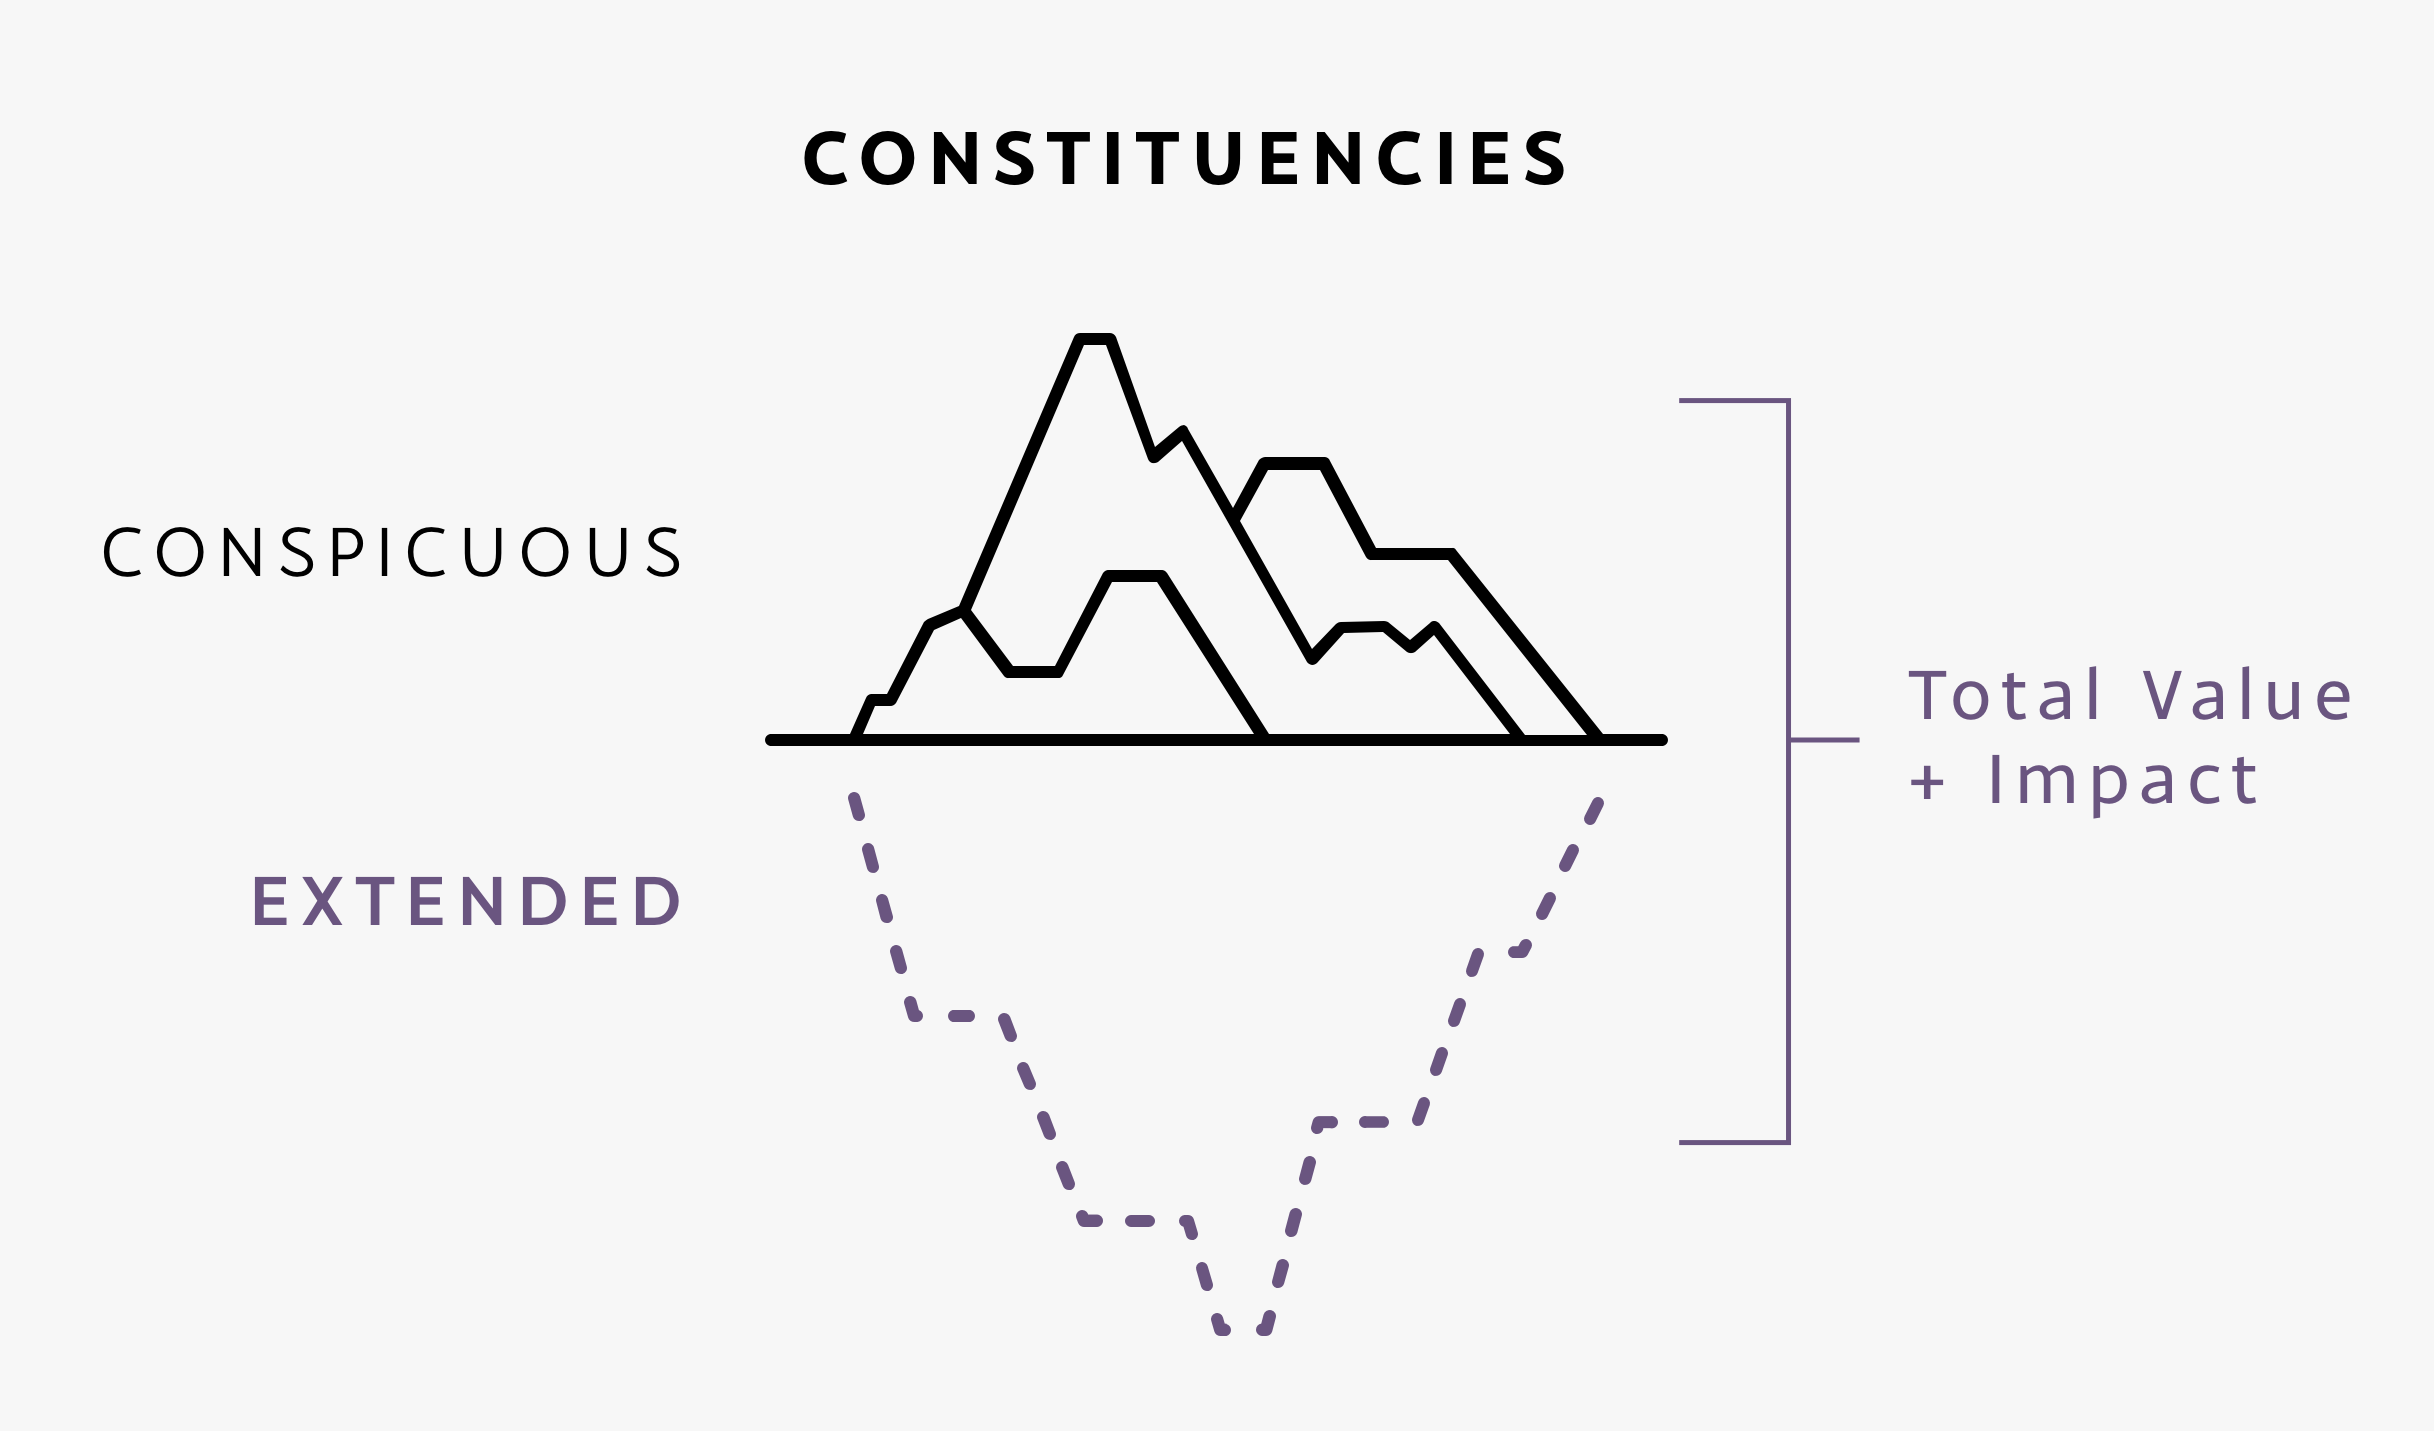 A diagram of constituencies, represented as an iceberg. Visible above the waterline is the conspicuous constituency. Below and less defined is the extended constituency. Together these represent the total value and impact of a company.